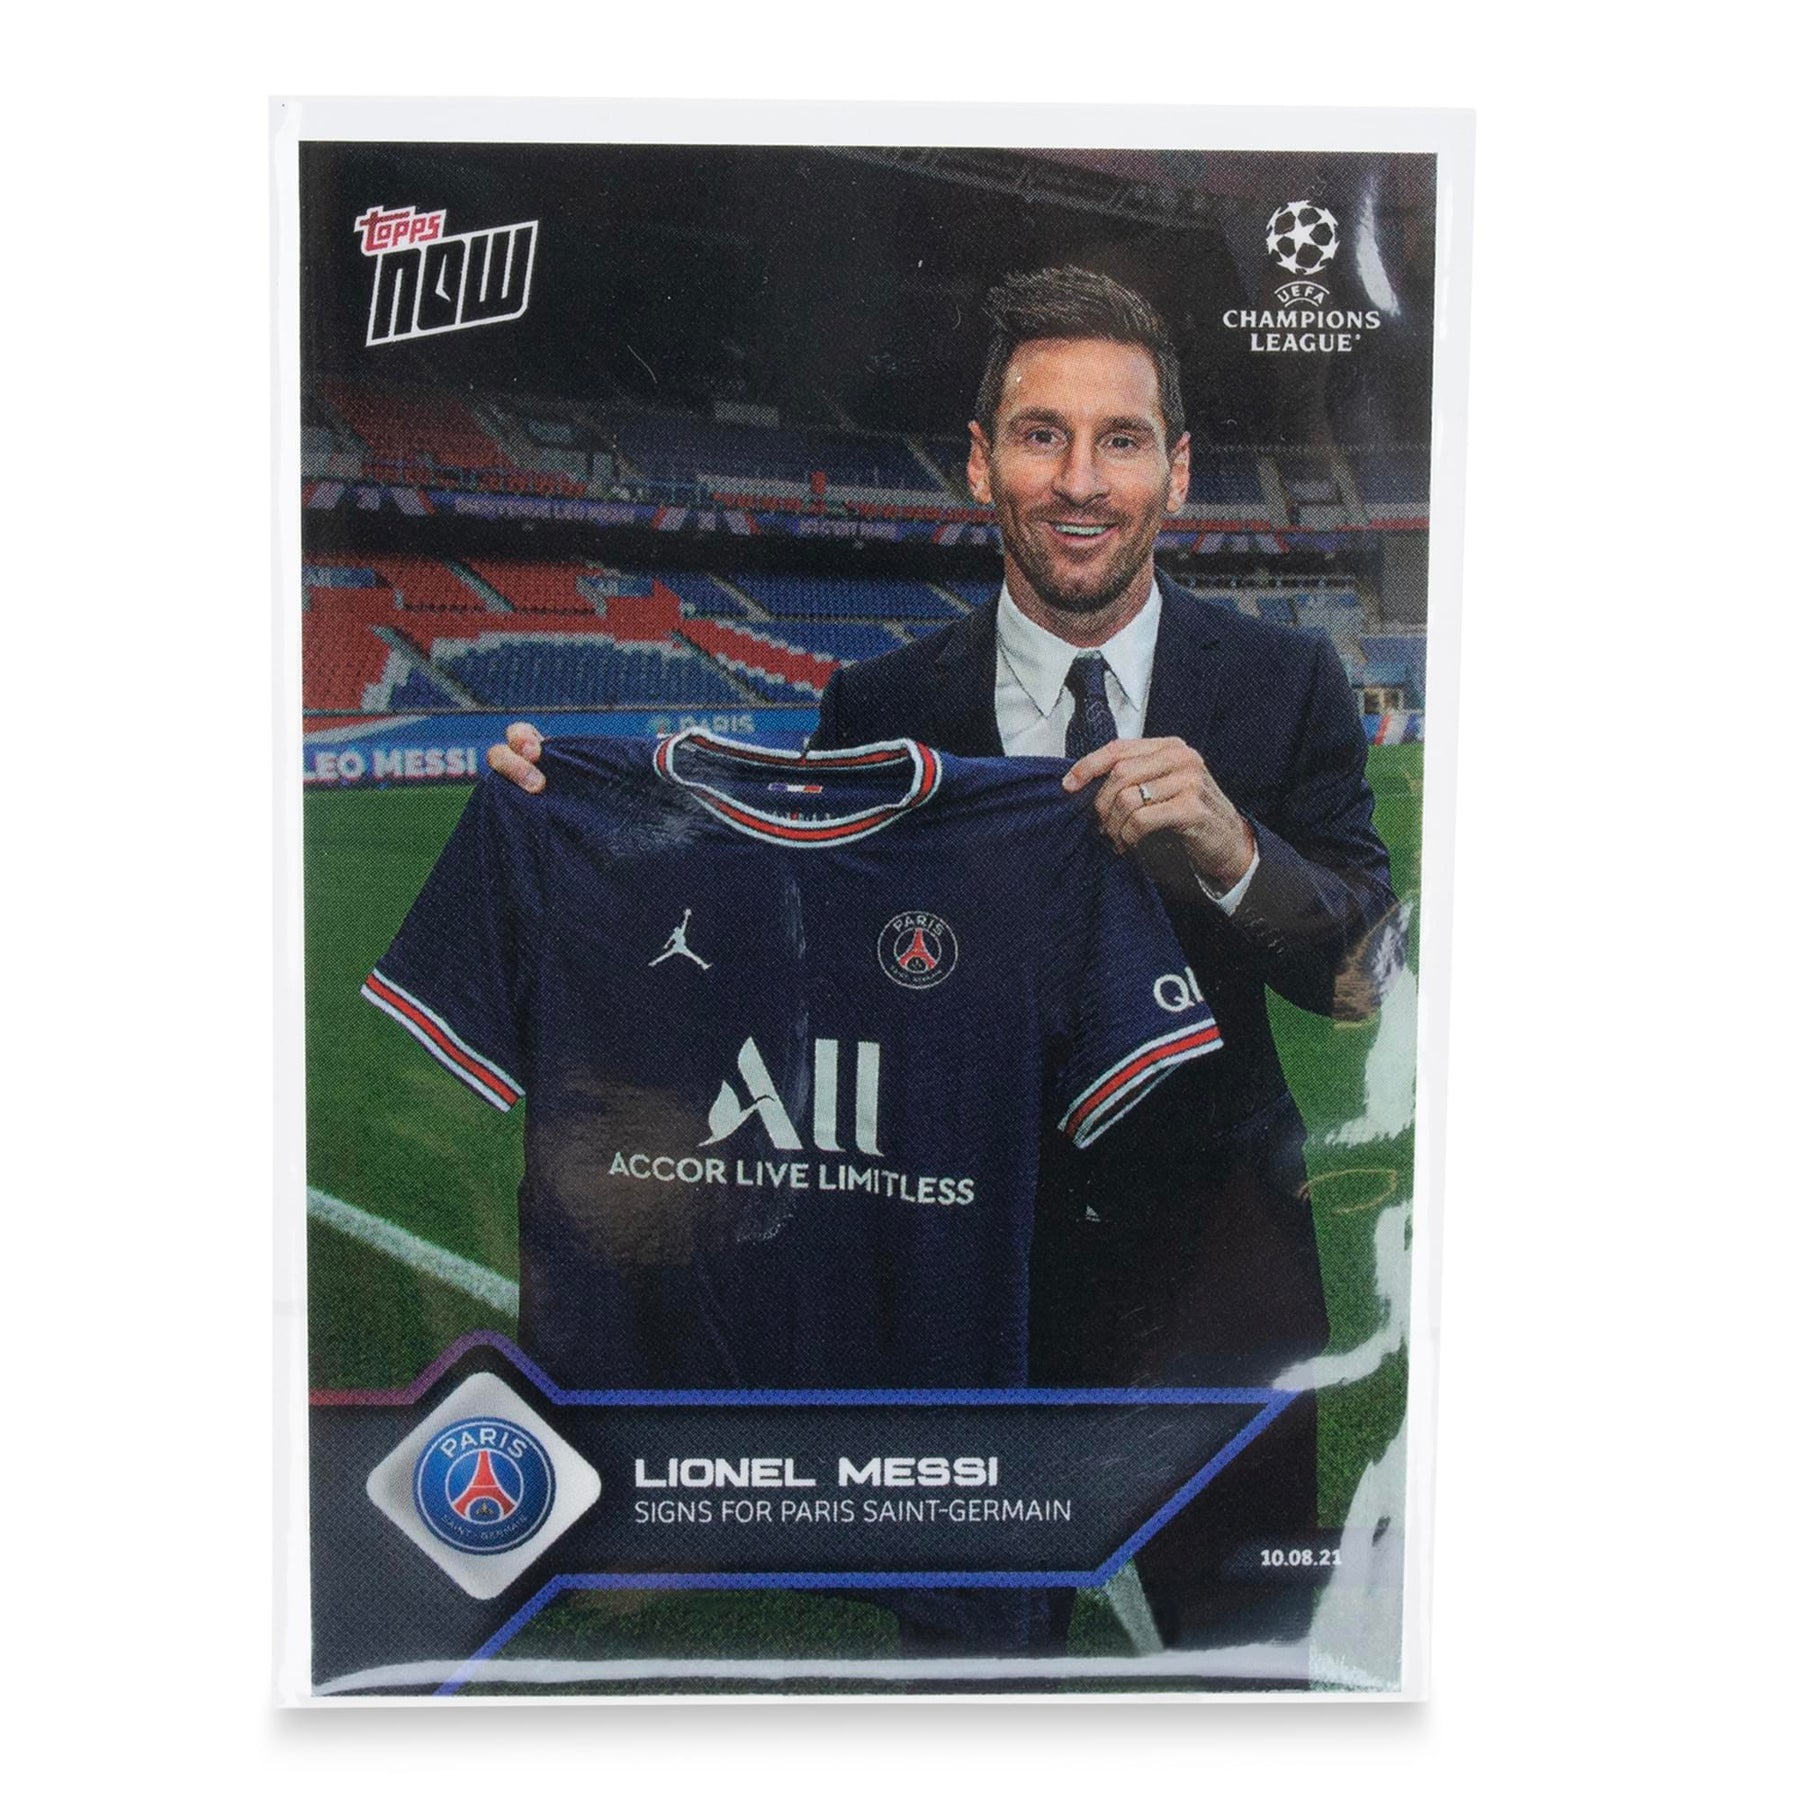 UCL TOPPS NOW Card #12 | Lionel Messi Signs for Paris Saint-Germain